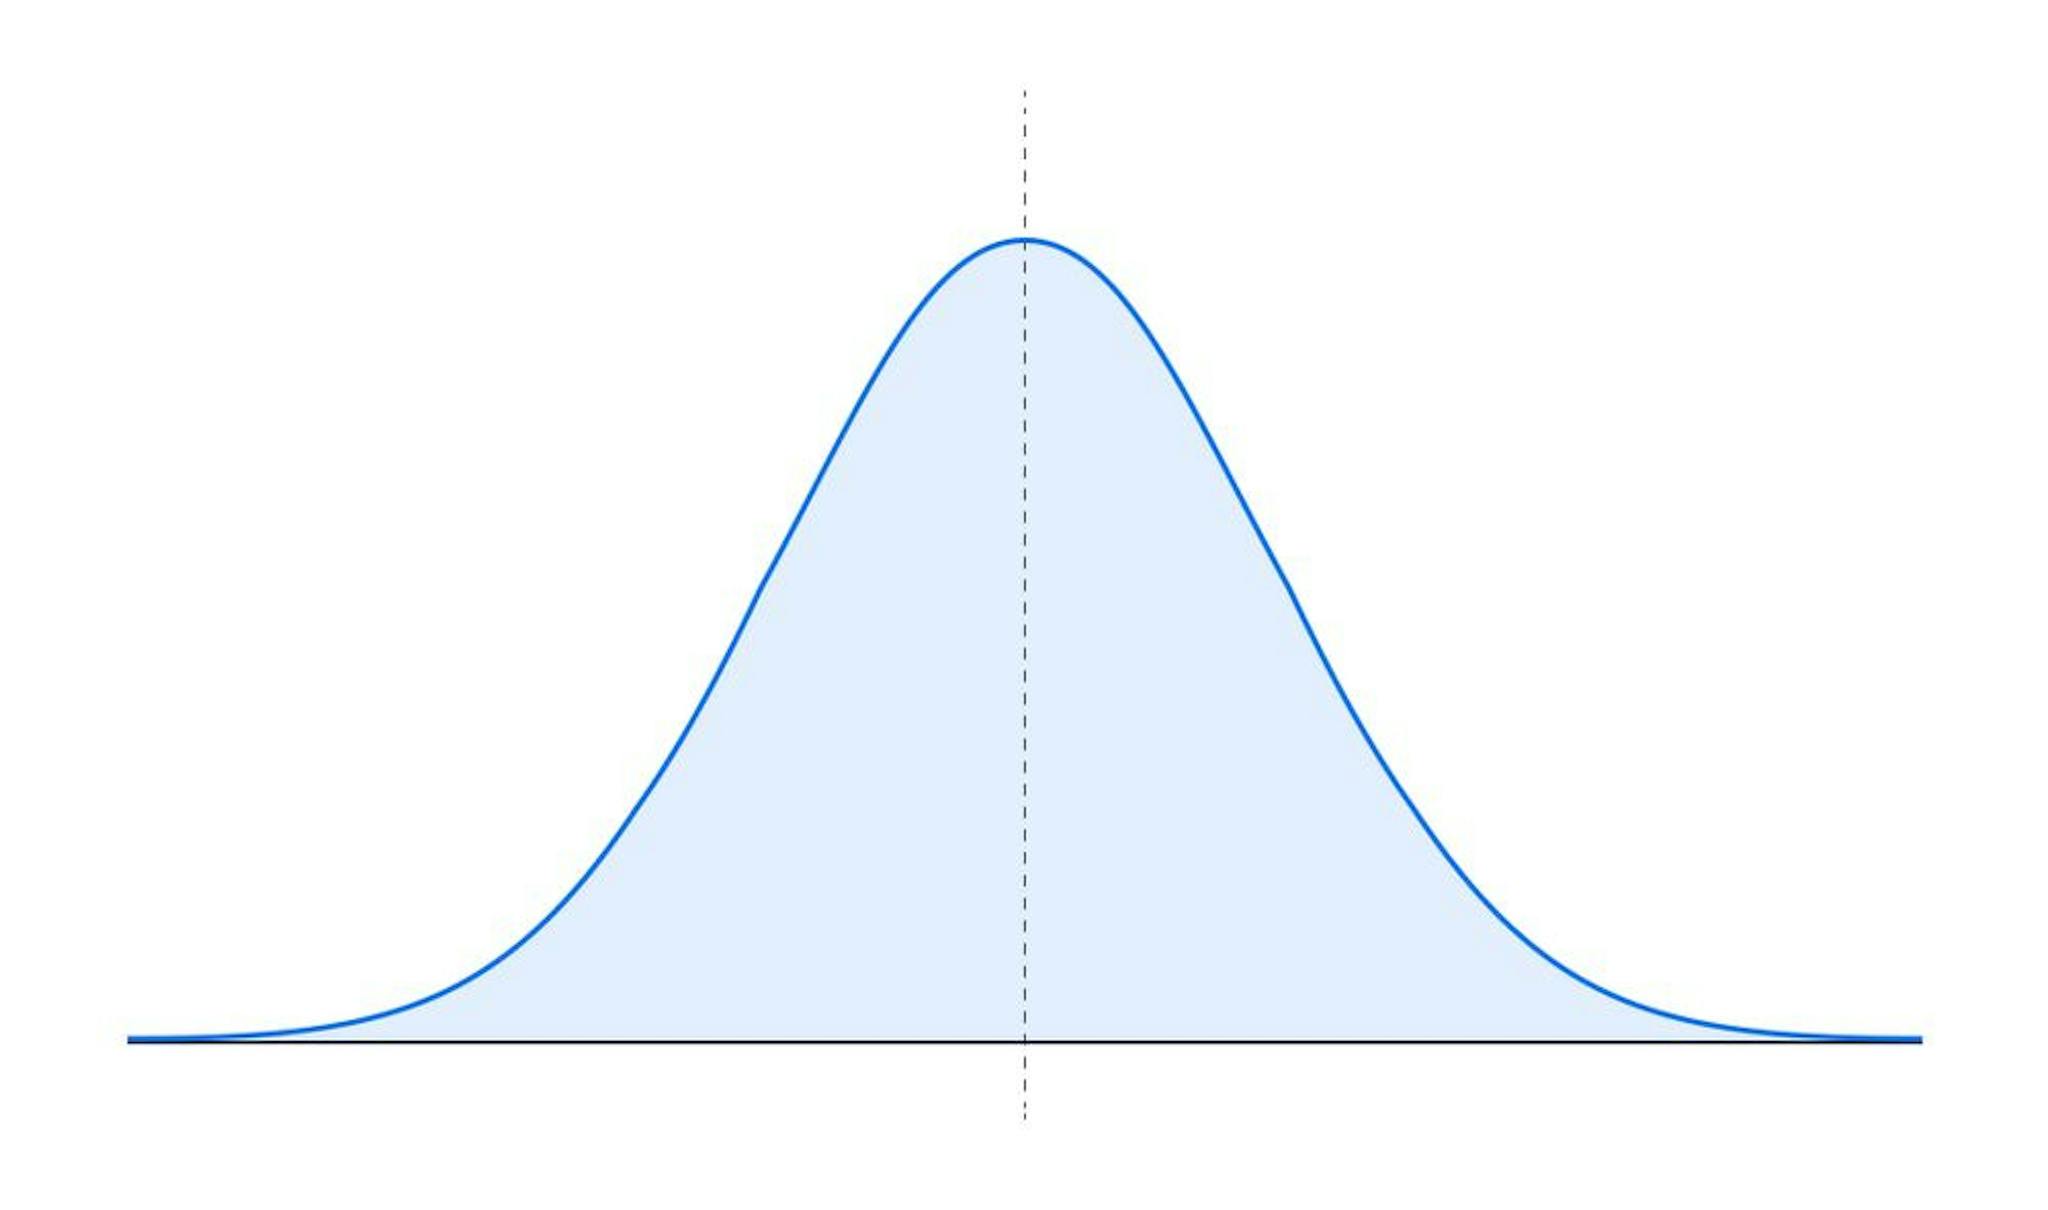 A normal, or Gaussian, distribution describes many real-world processes that fall around a given value and where the probability of finding values that are further from the center decreases. The median, average, and mode are all the same for a normal distribution, and they fall on the dotted line at the center. 